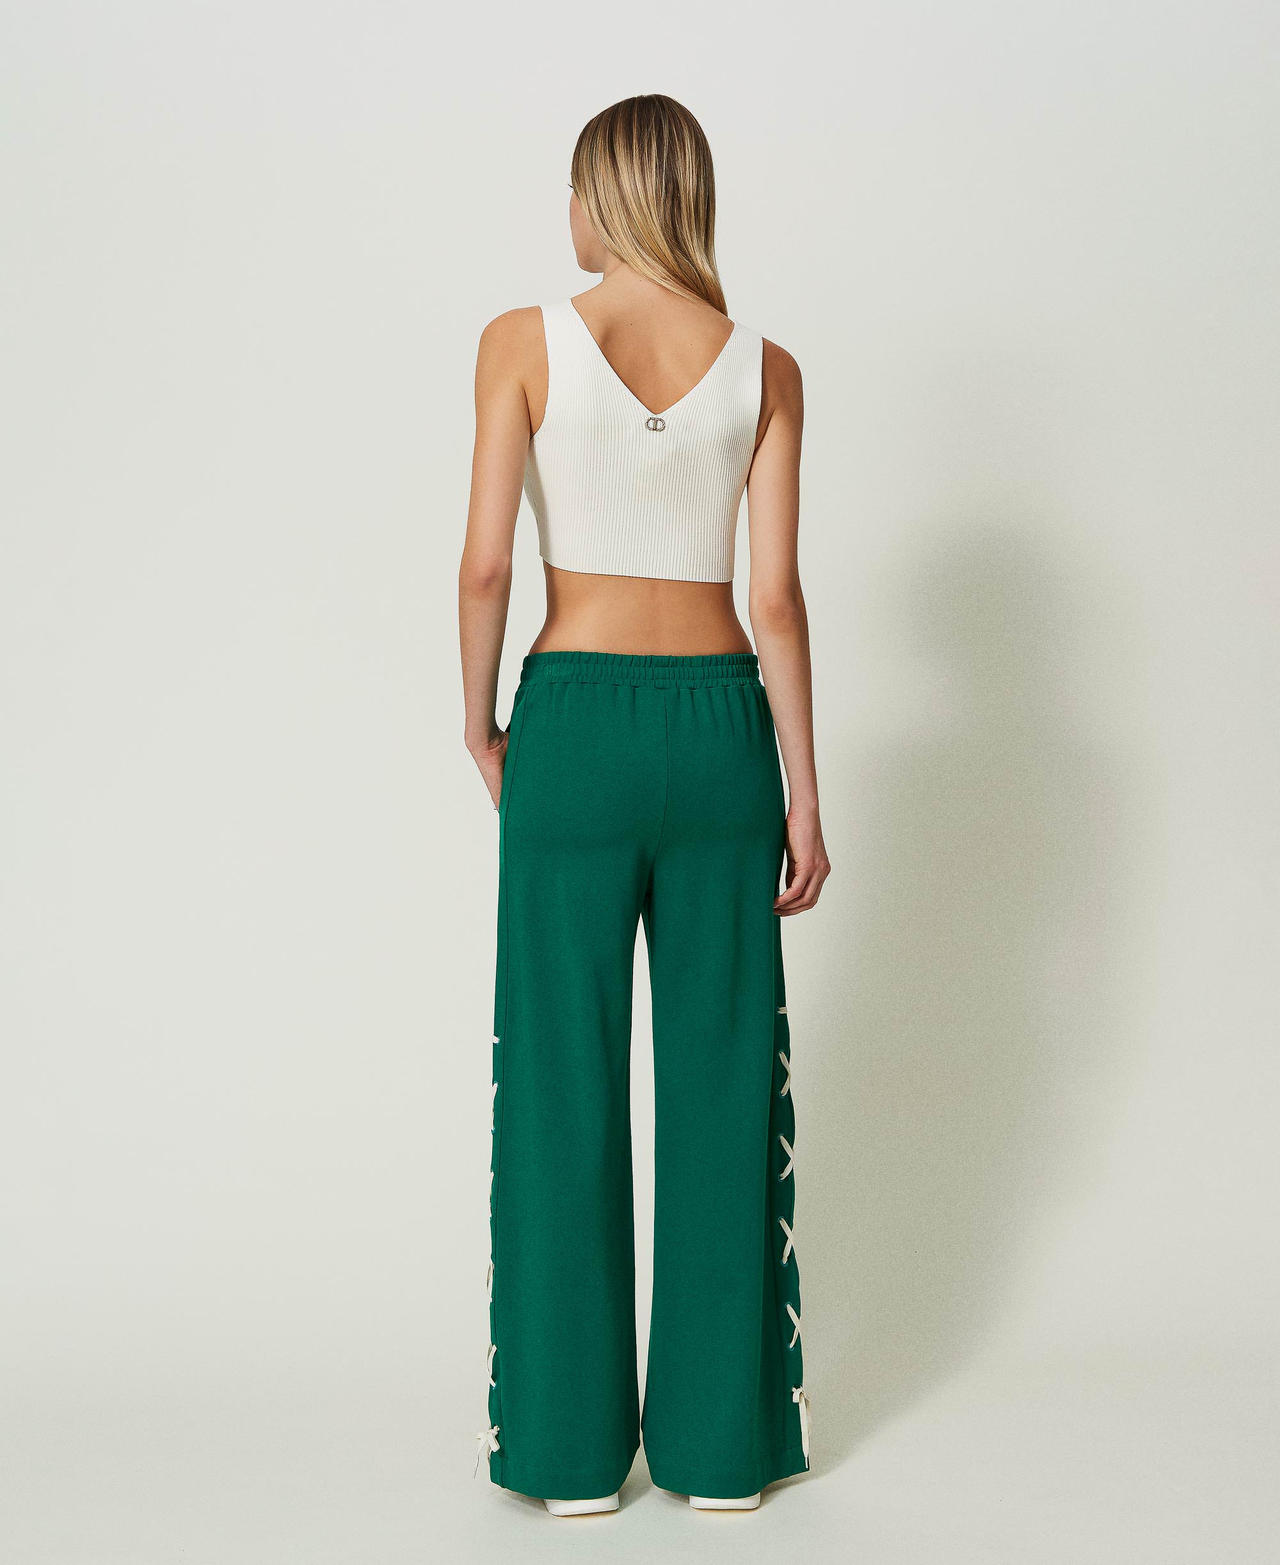 Palazzo trousers with slits “Alpine Green” Woman 241LL2MBB-03